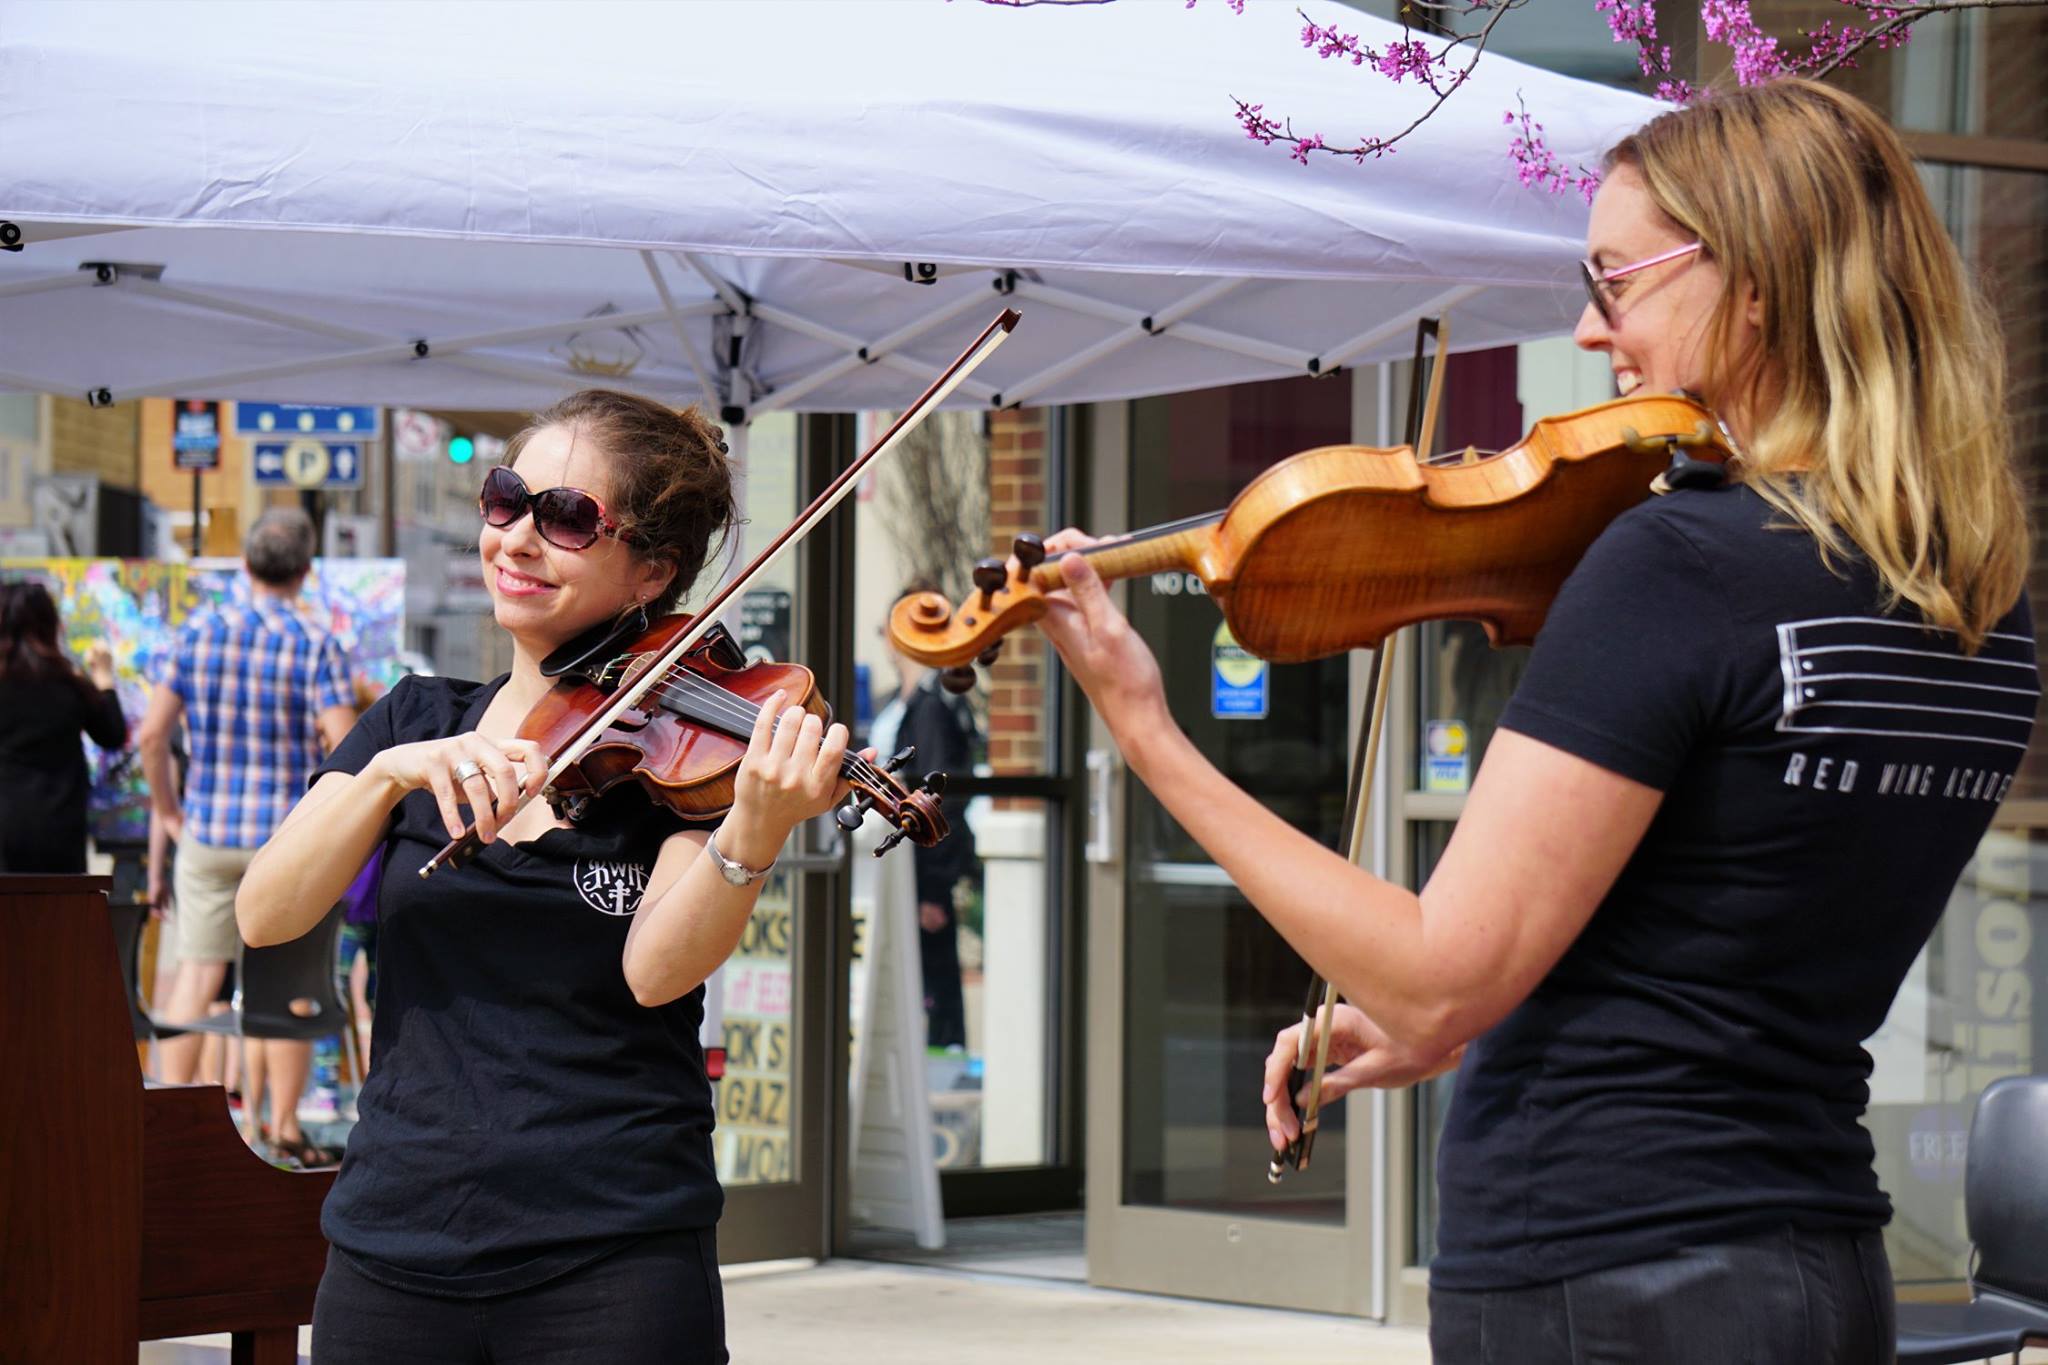 Women smiling playing violins at music event